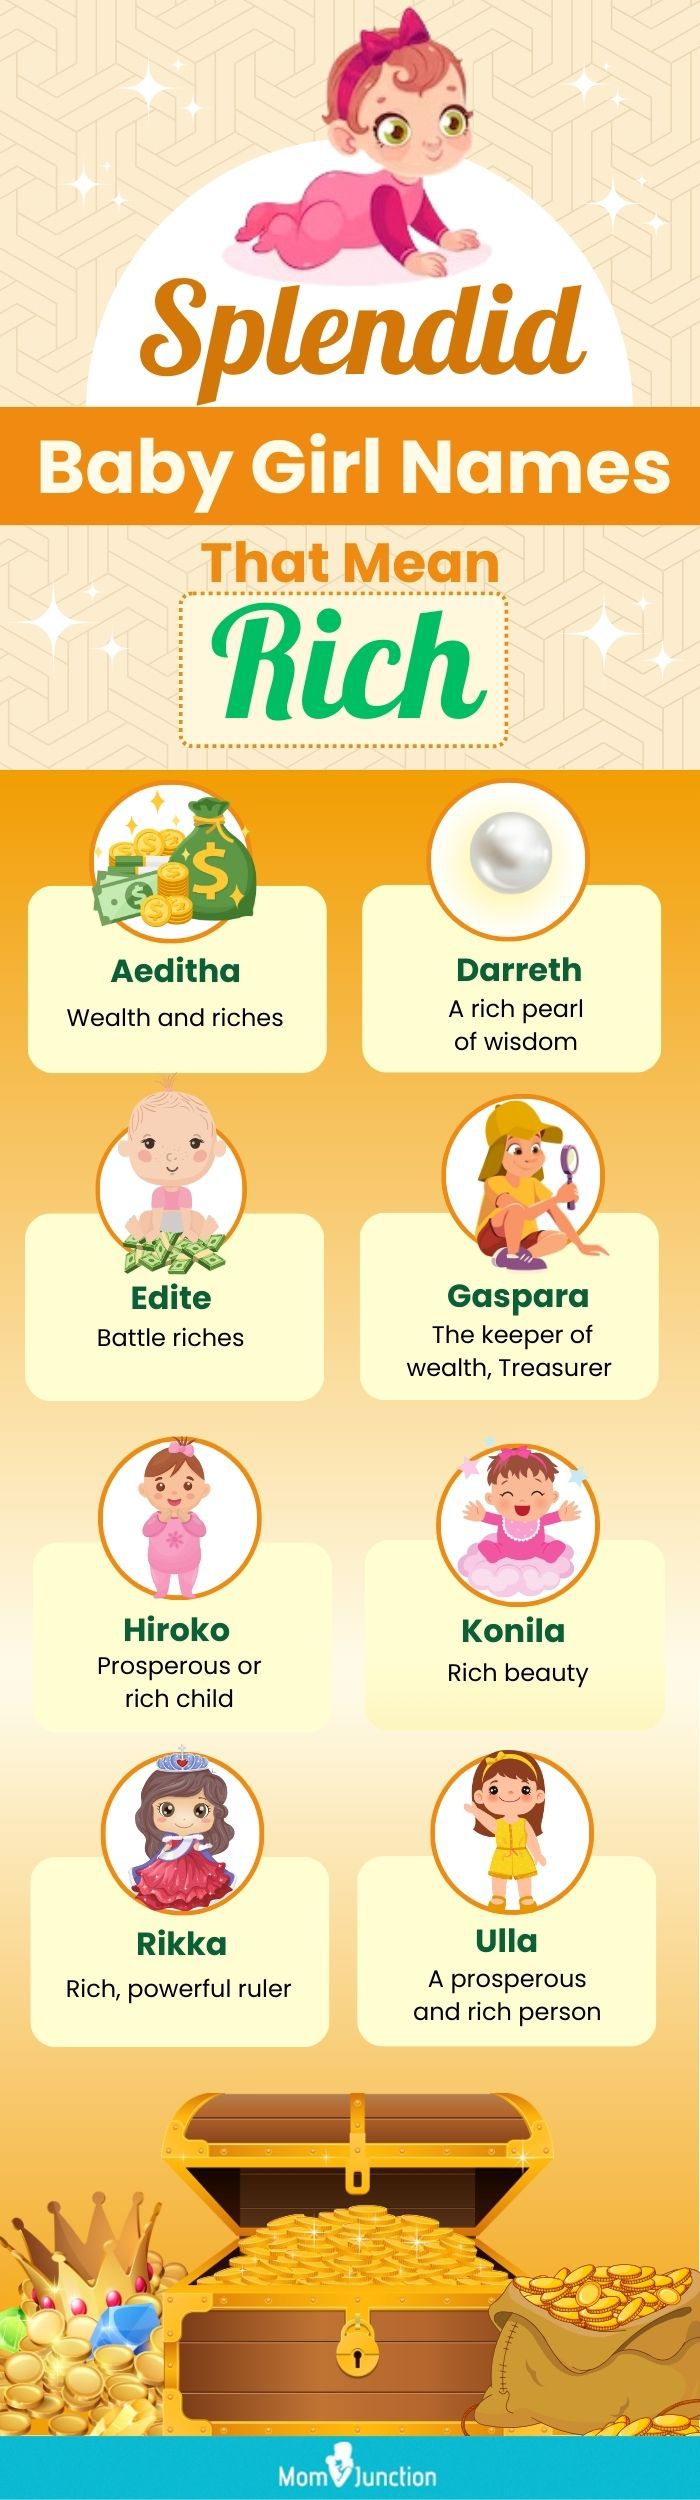 splendid baby girl names that mean rich(infographic)